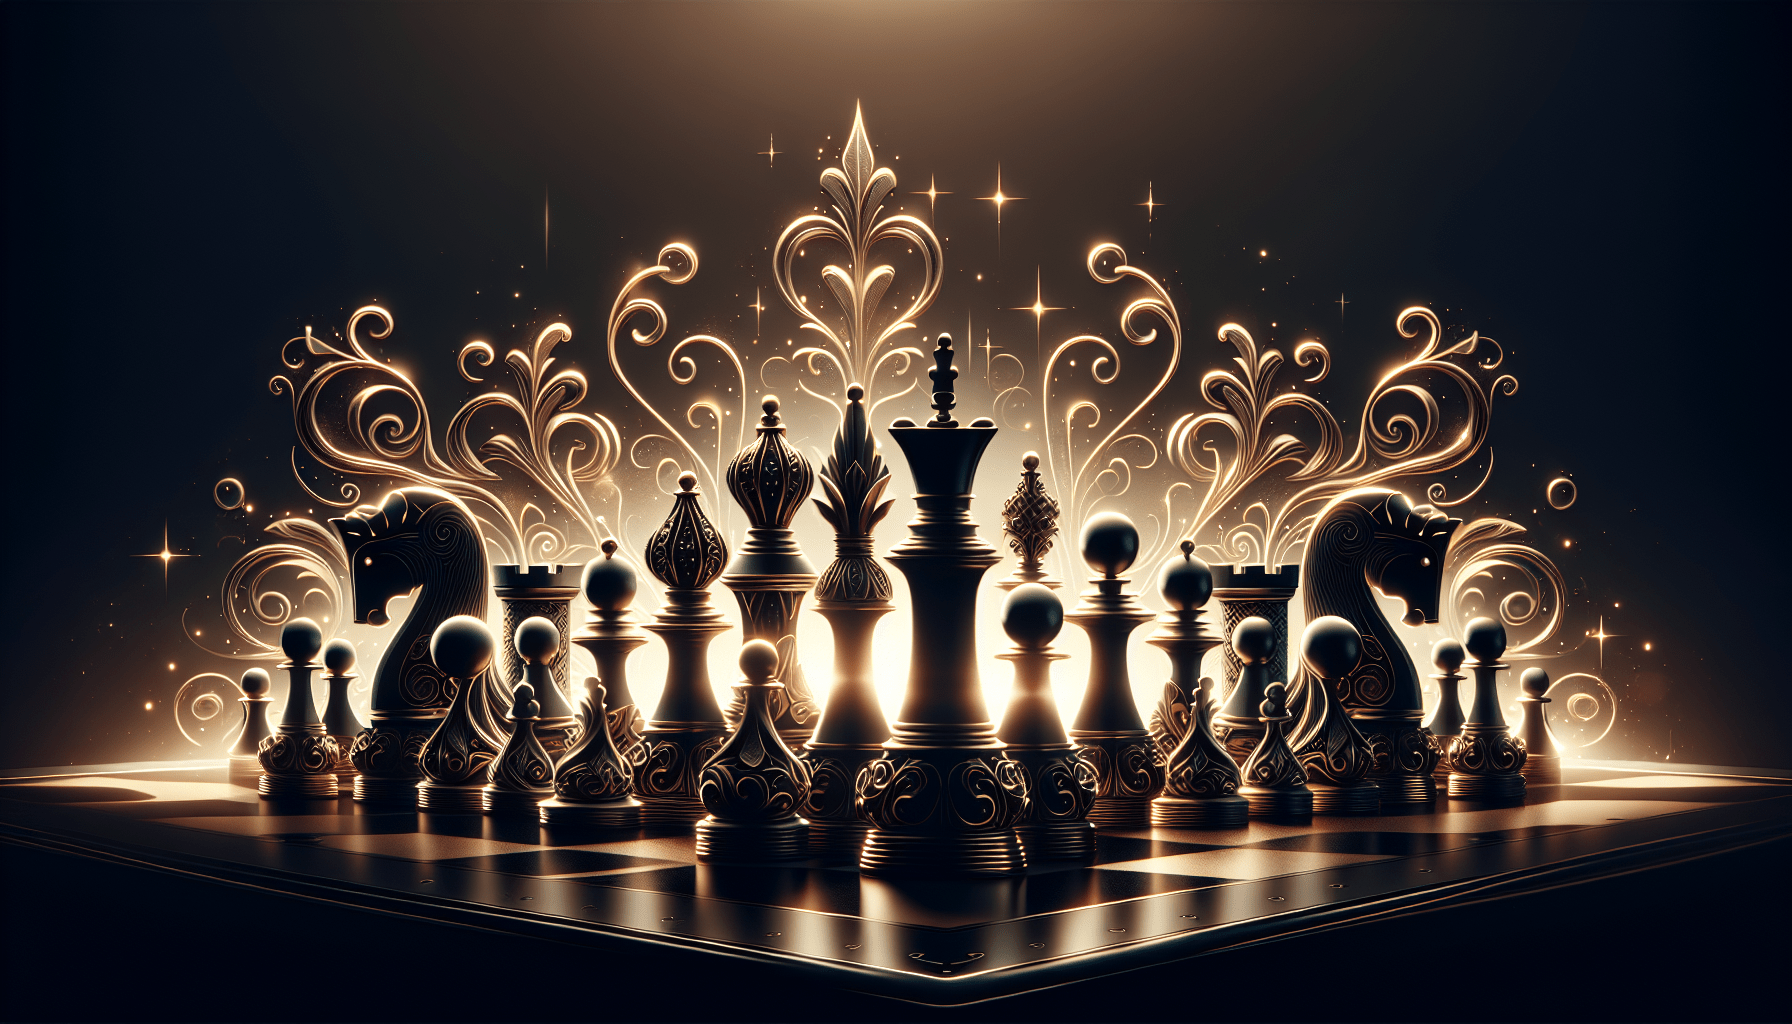 Artistic representation of a chess set with ornate pieces and intricate designs, illuminated against a dark background with glowing light effects.